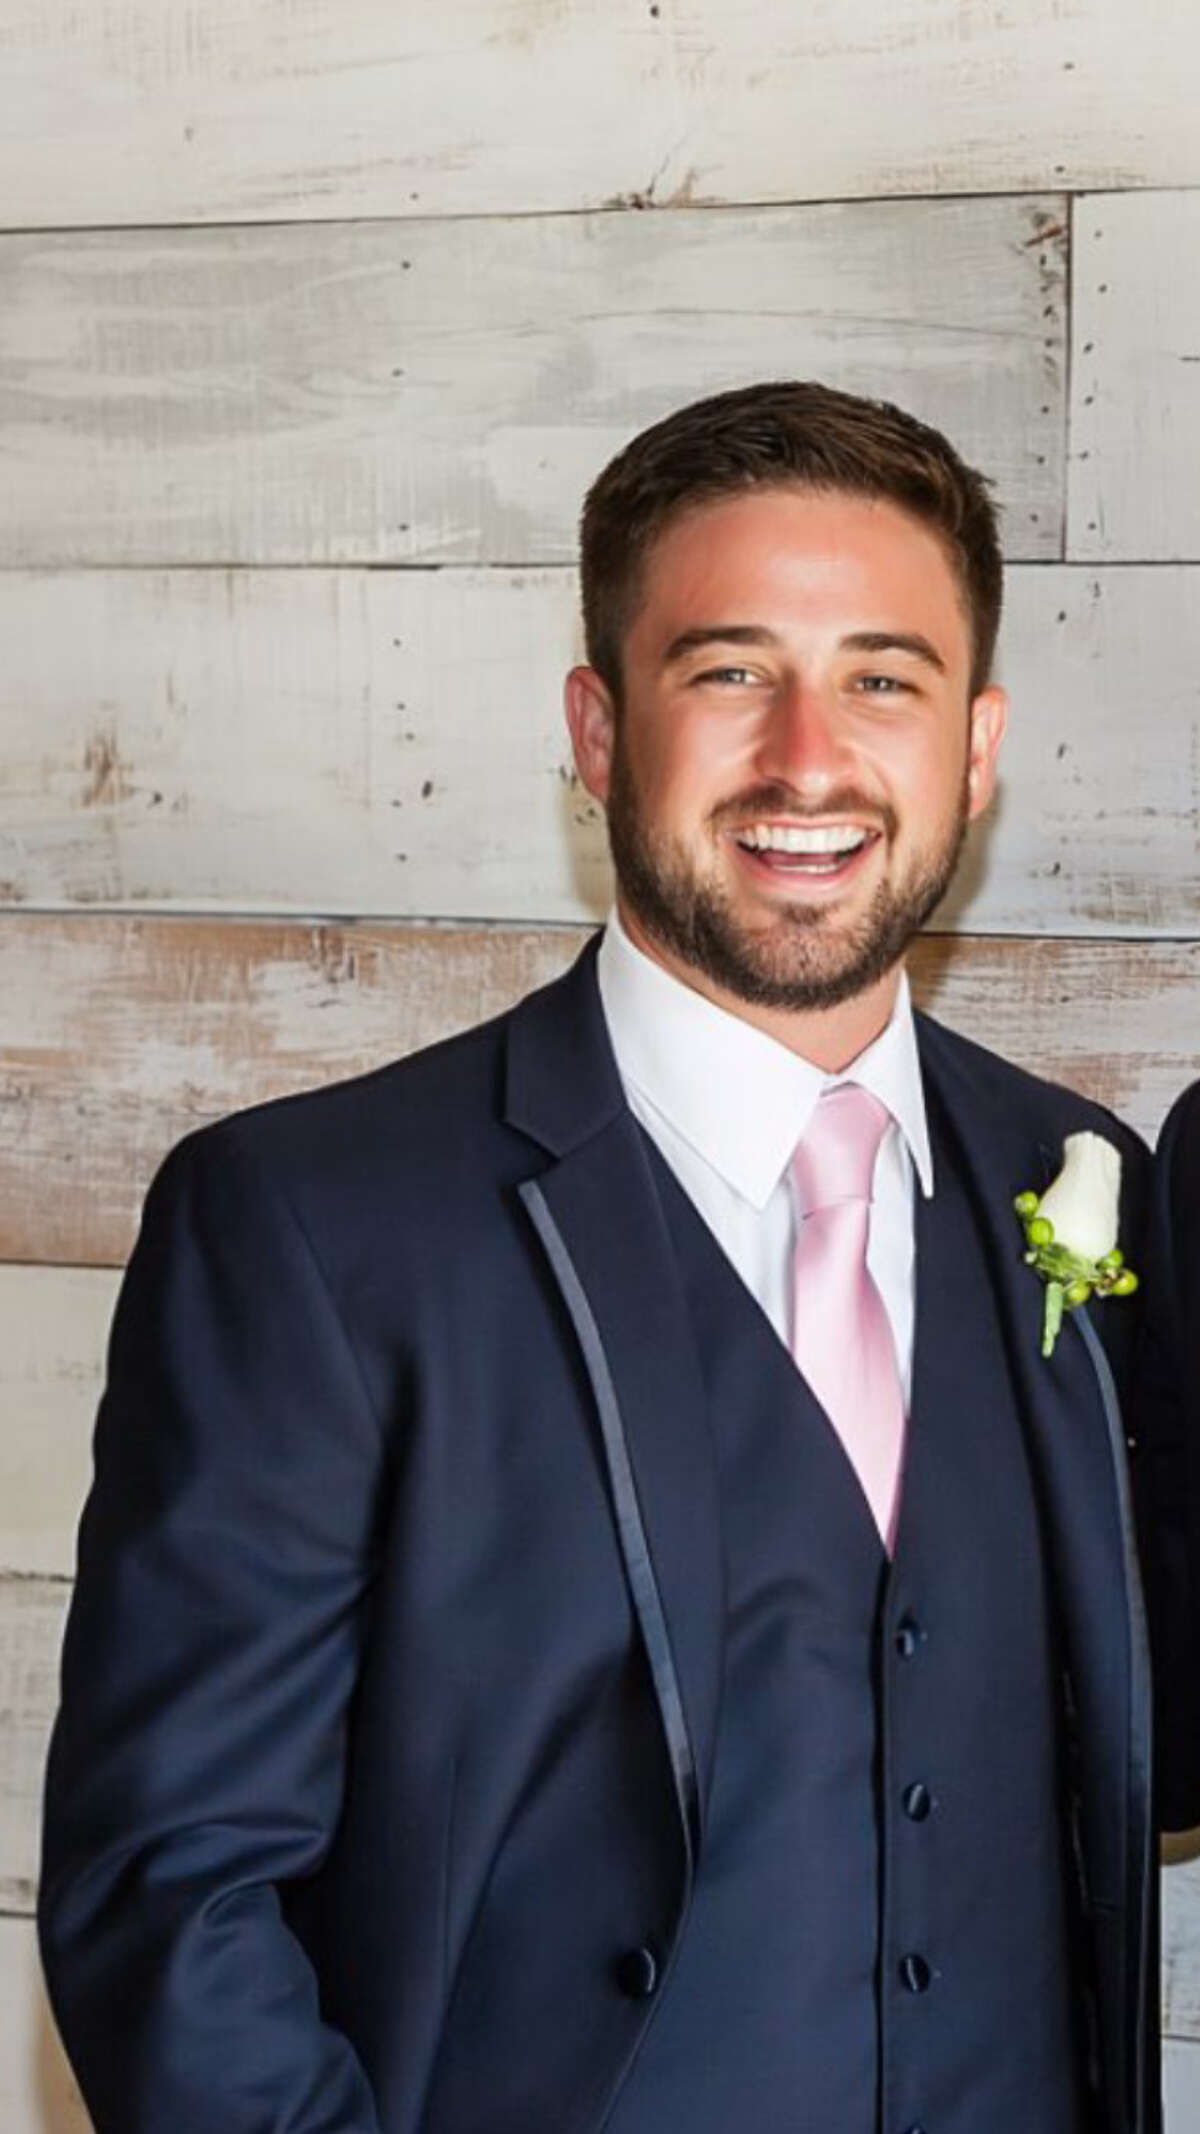 Collin Campbell at a 2016 family wedding.